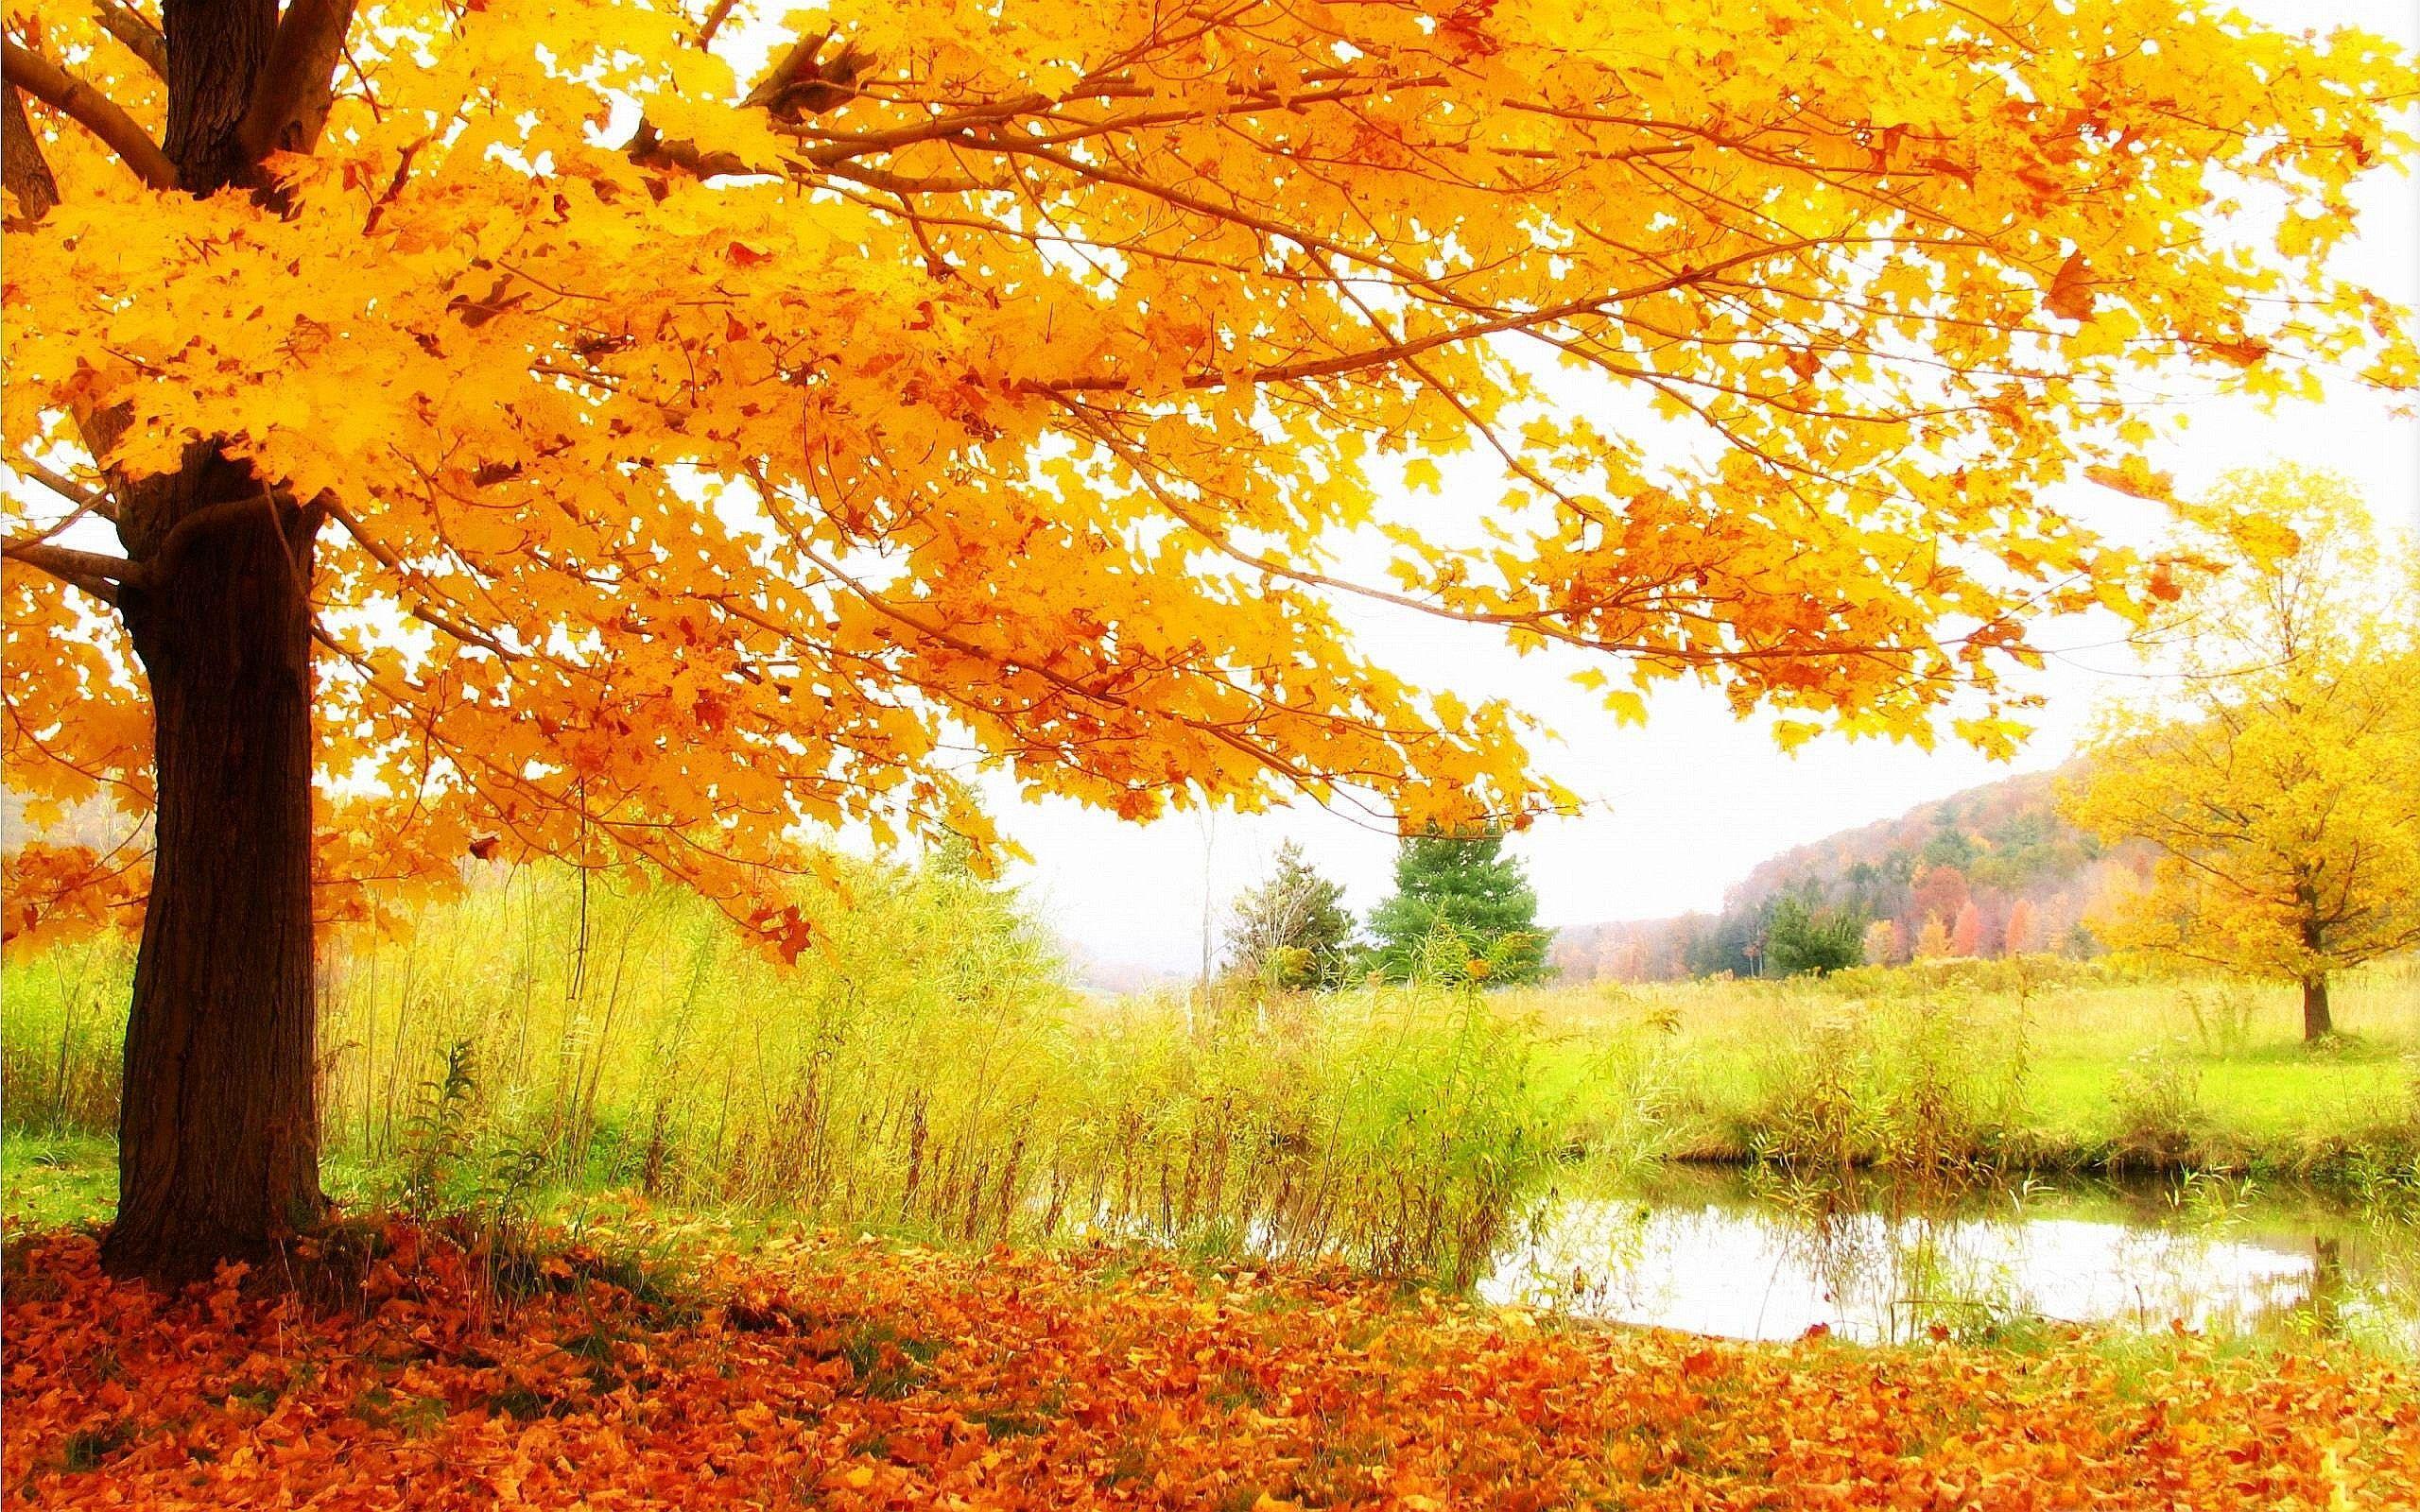 Autumn scenery Wallpaper Picture Photo Image. Download